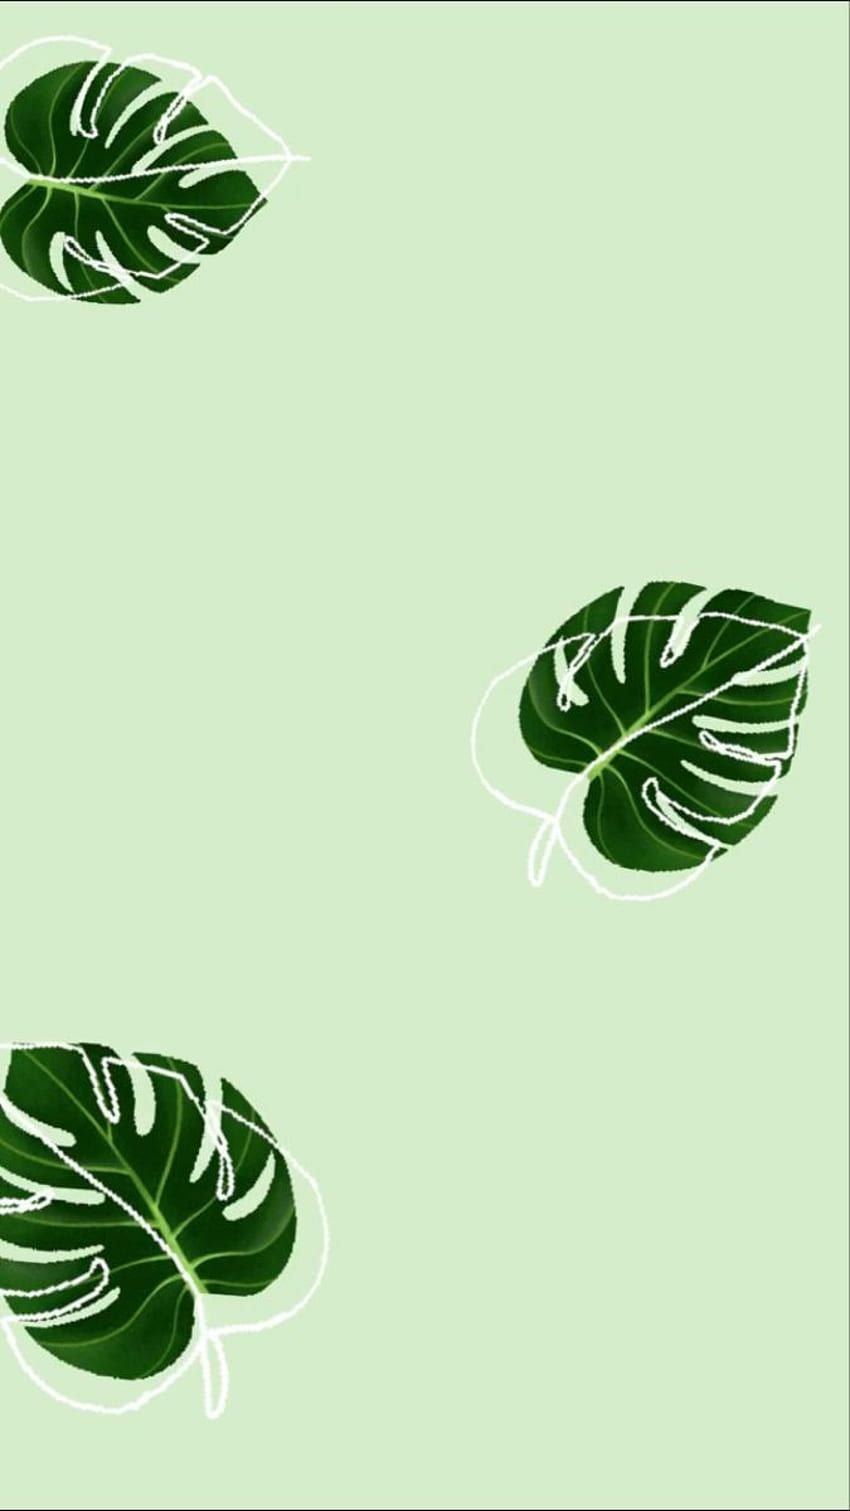 Monstera leaves on a green background - Mint green, pastel green, light green, green, leaves